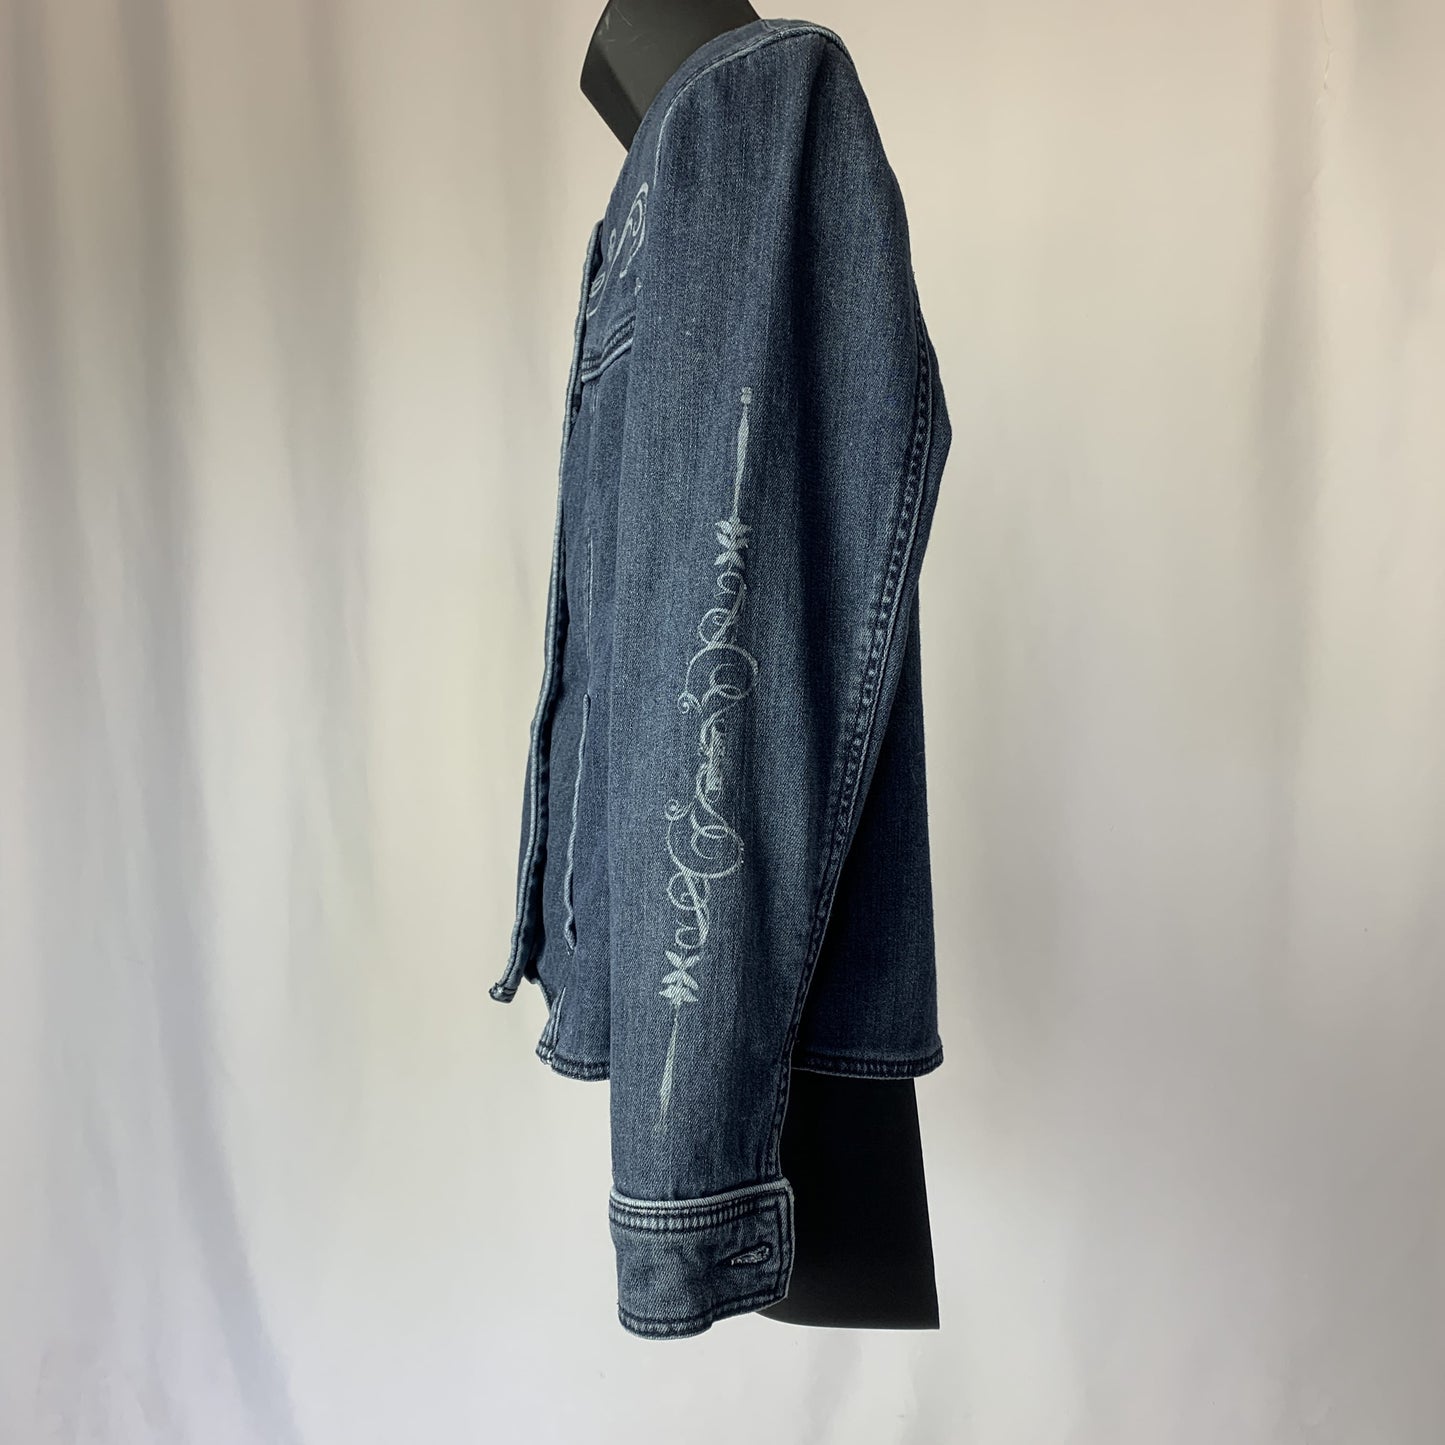 Curly Filigree | Blue Jean Jacket | 41” chest